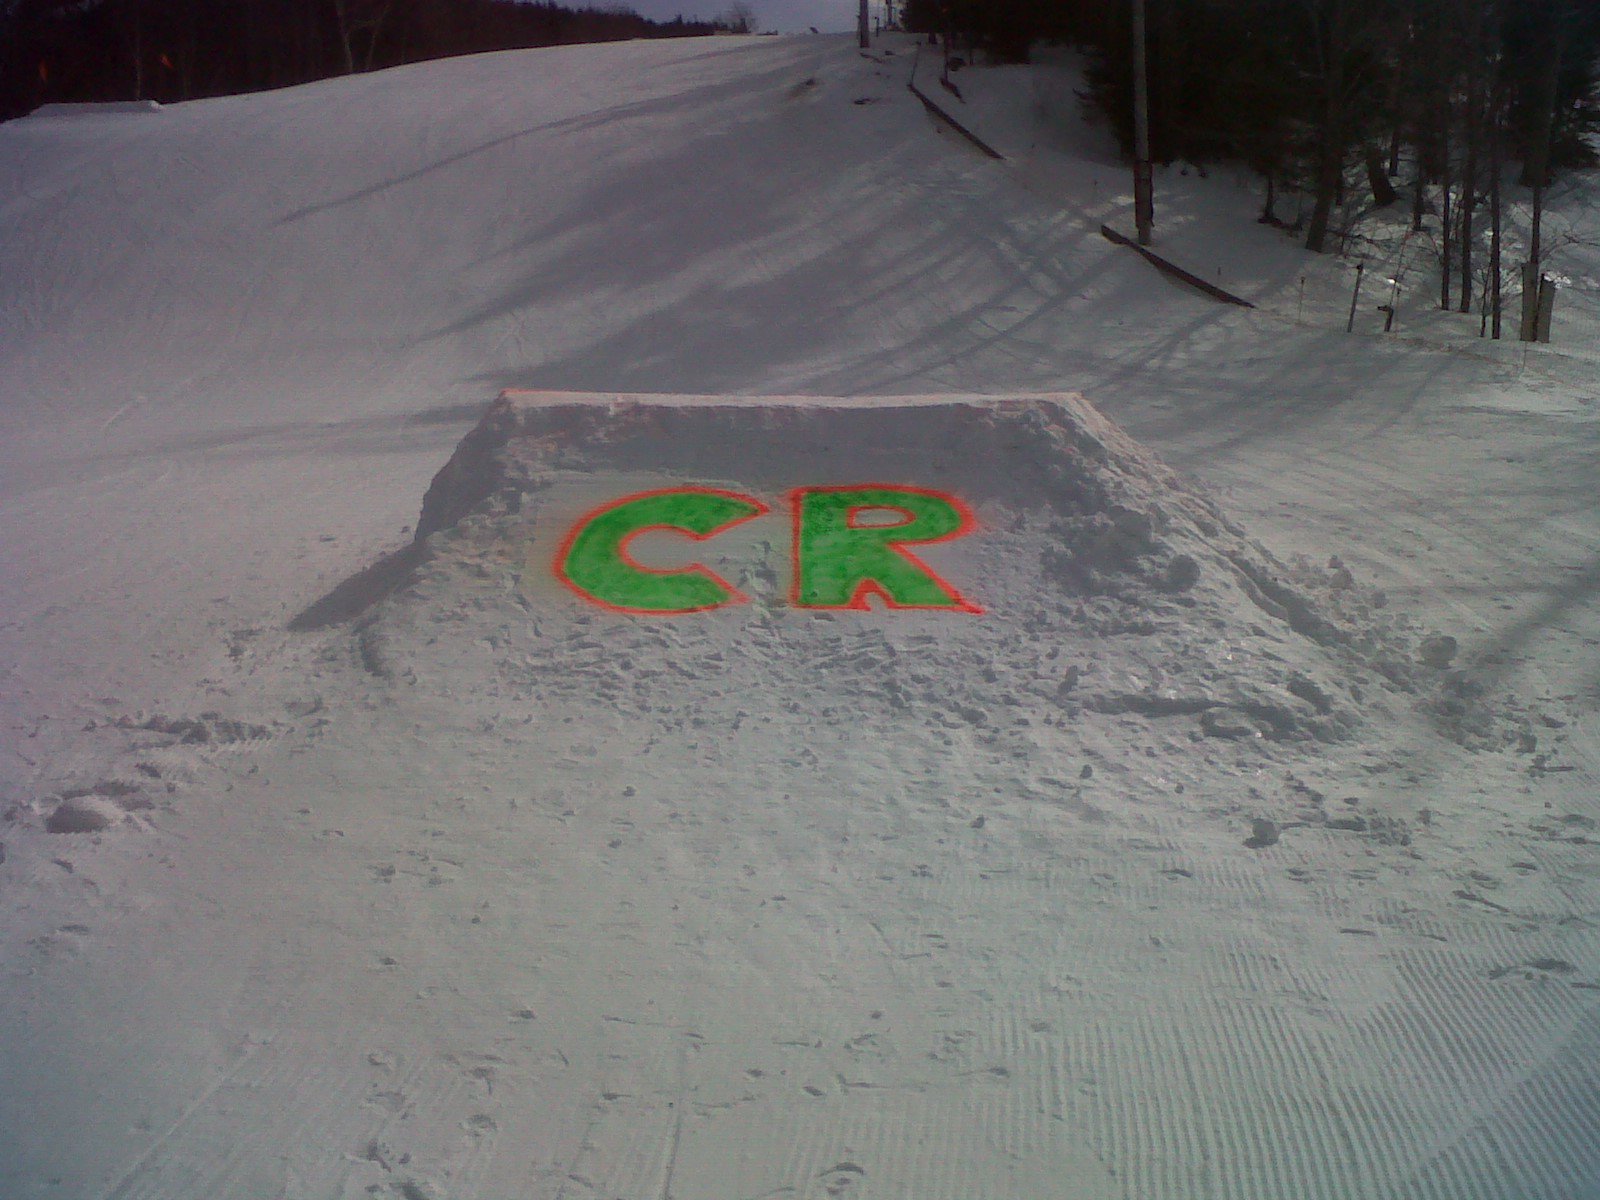 For CR 2/24/11